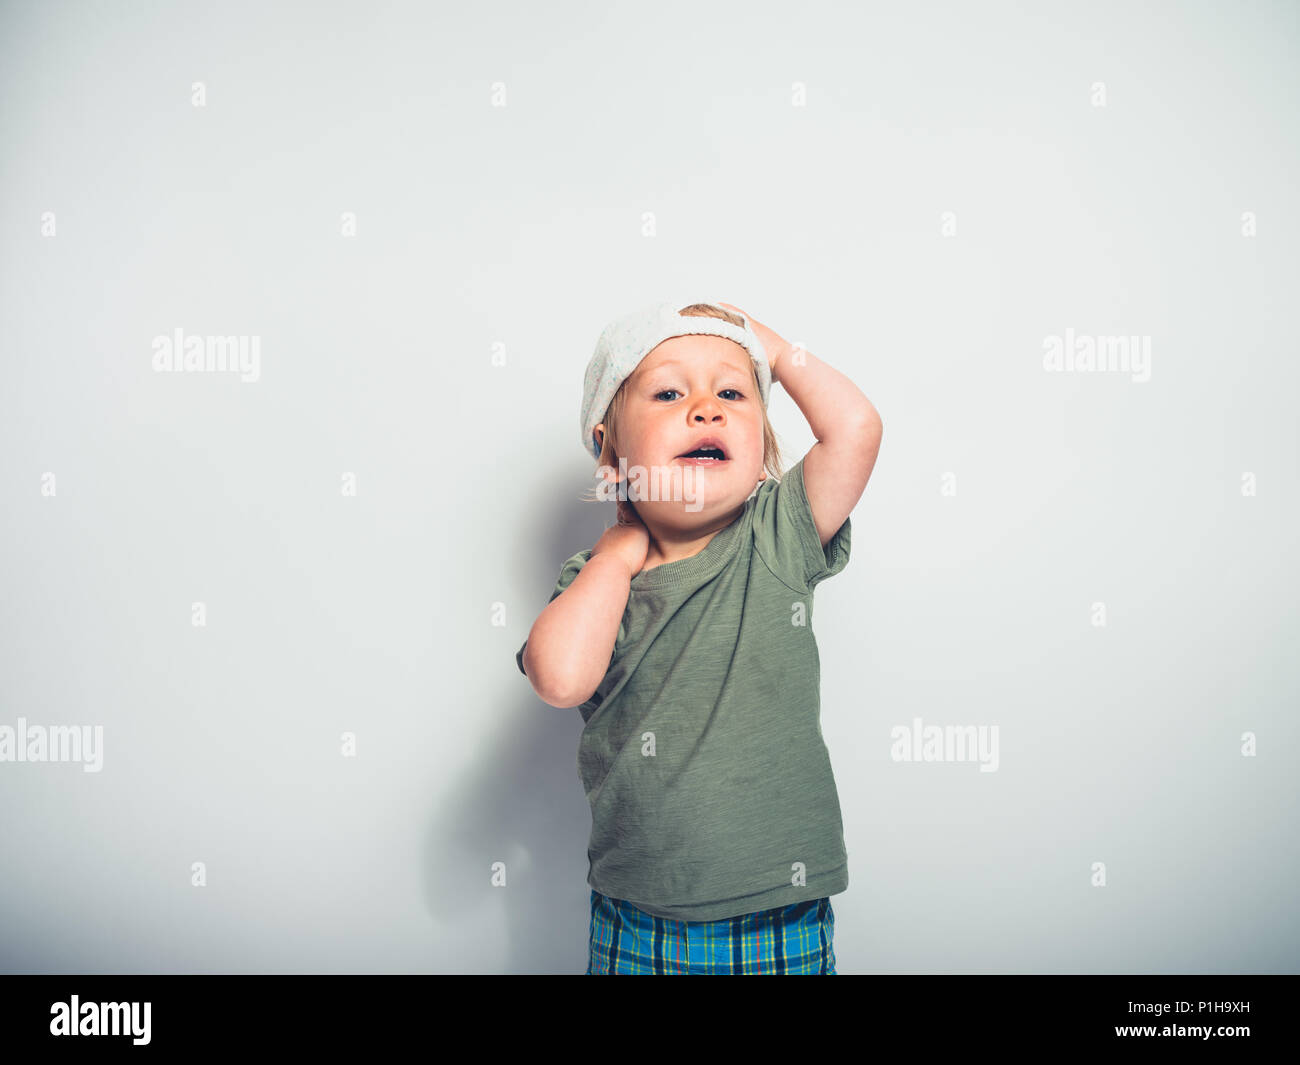 A cute little toddler boy wearing a baseball cap is striking a pose on a white background Stock Photo